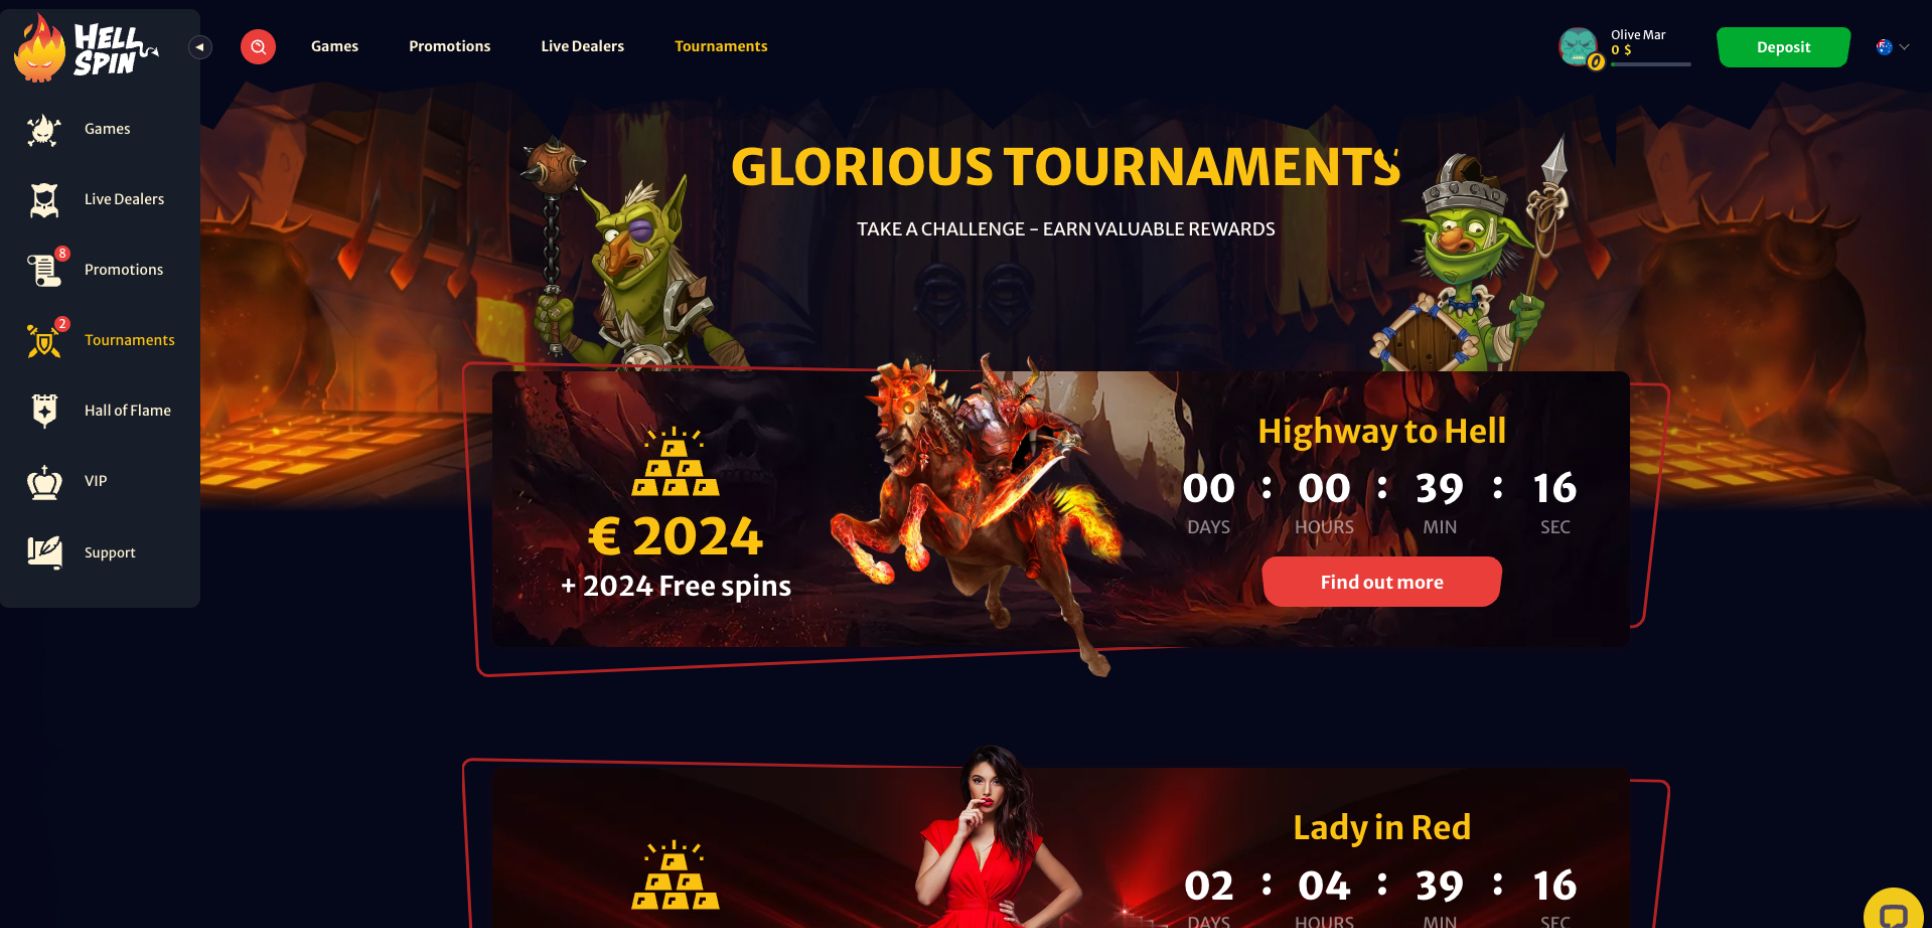 Hell Spin Casino Tournaments